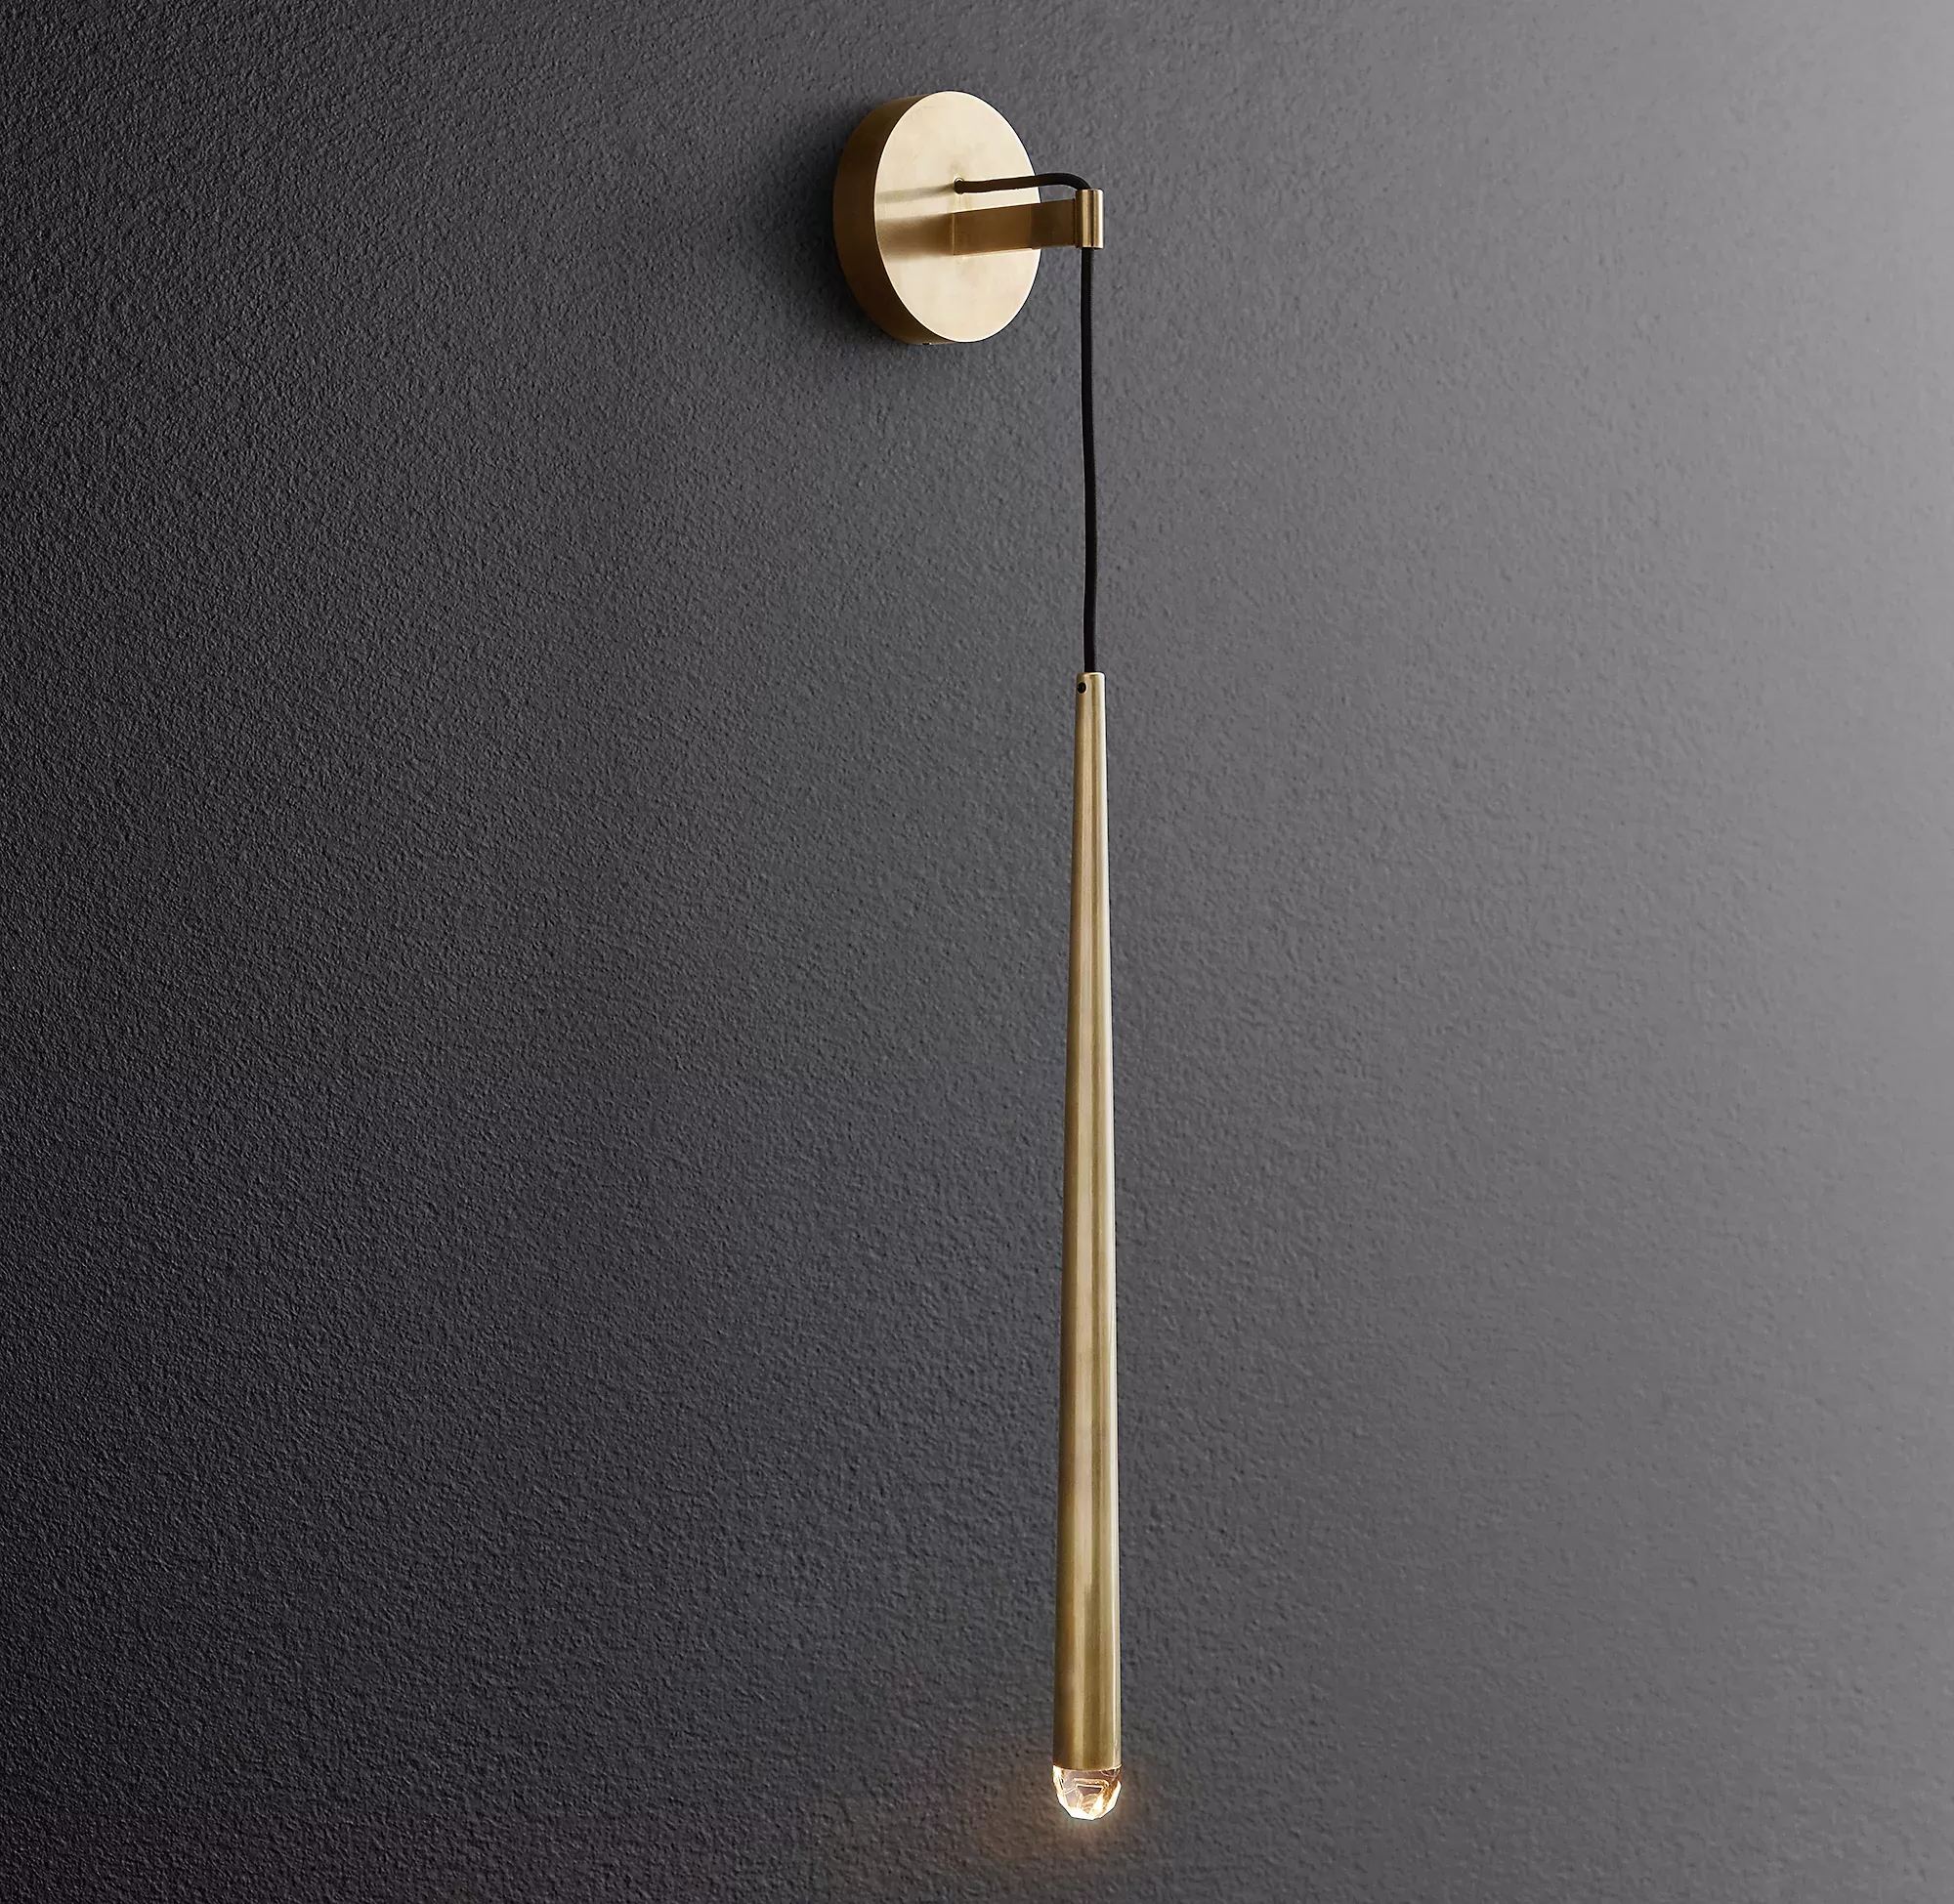 Aquitaine Grand Wall Sconce